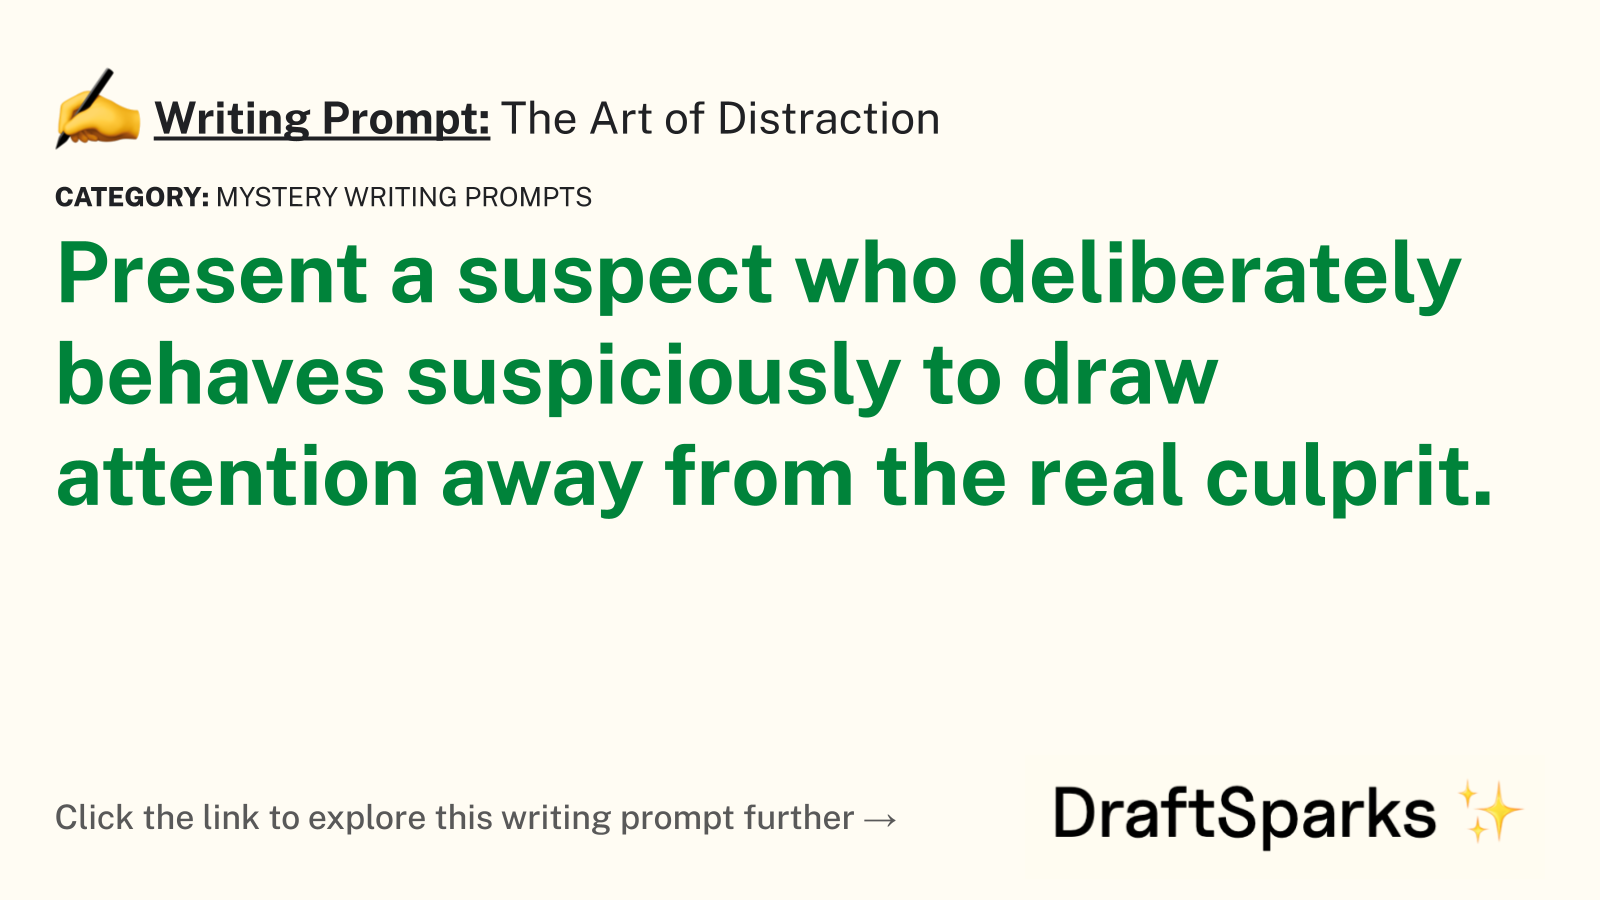 The Art of Distraction